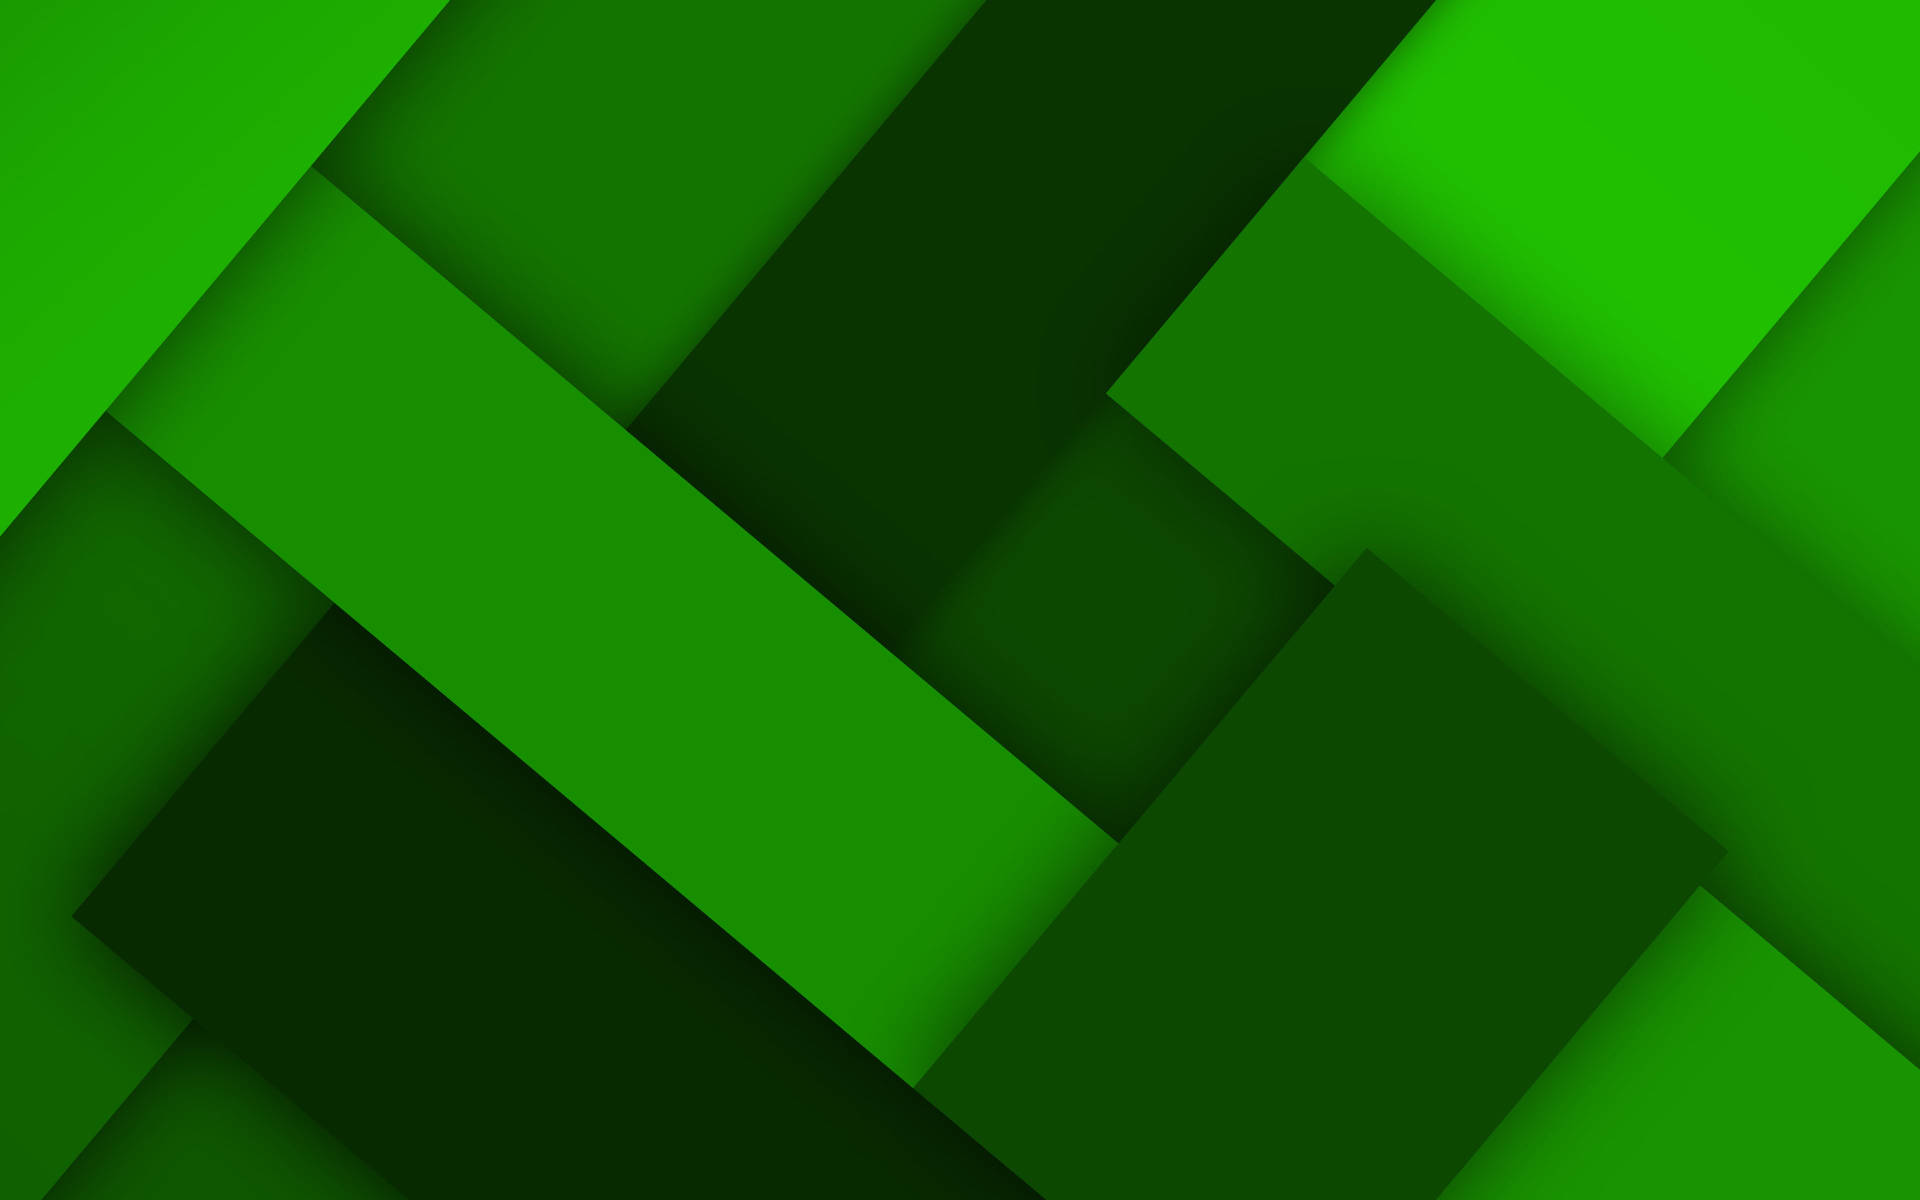 Android Material Design Green Rectangles